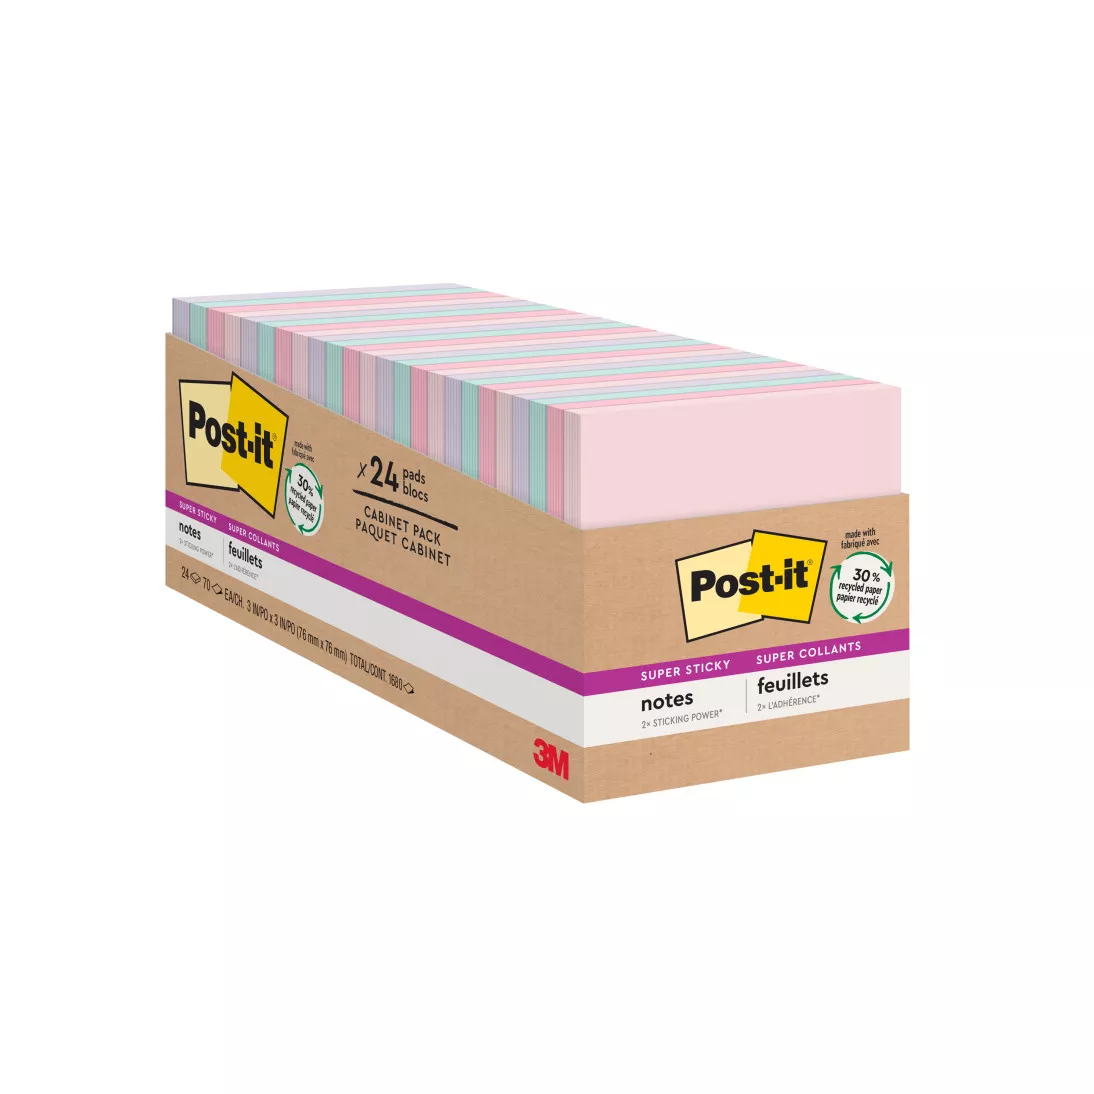 Post-it® Super Sticky Recycled Notes 654-24NH-CP, 3 in x 3 in (76 mm x
76 mm) Bali Collection